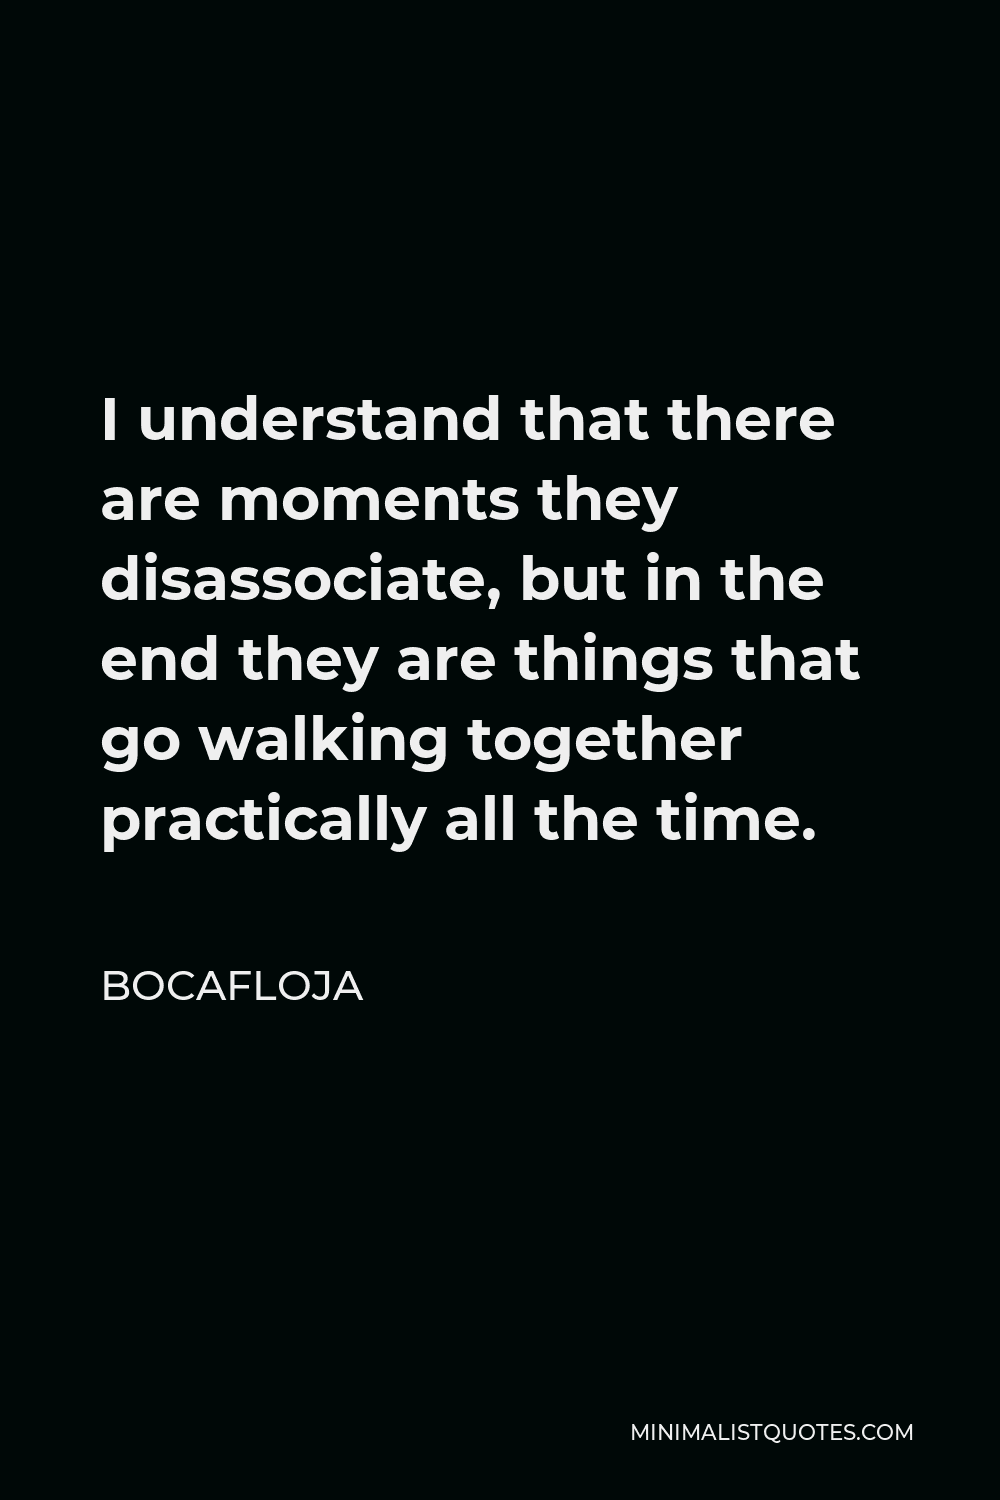 Bocafloja Quote - I understand that there are moments they disassociate, but in the end they are things that go walking together practically all the time.